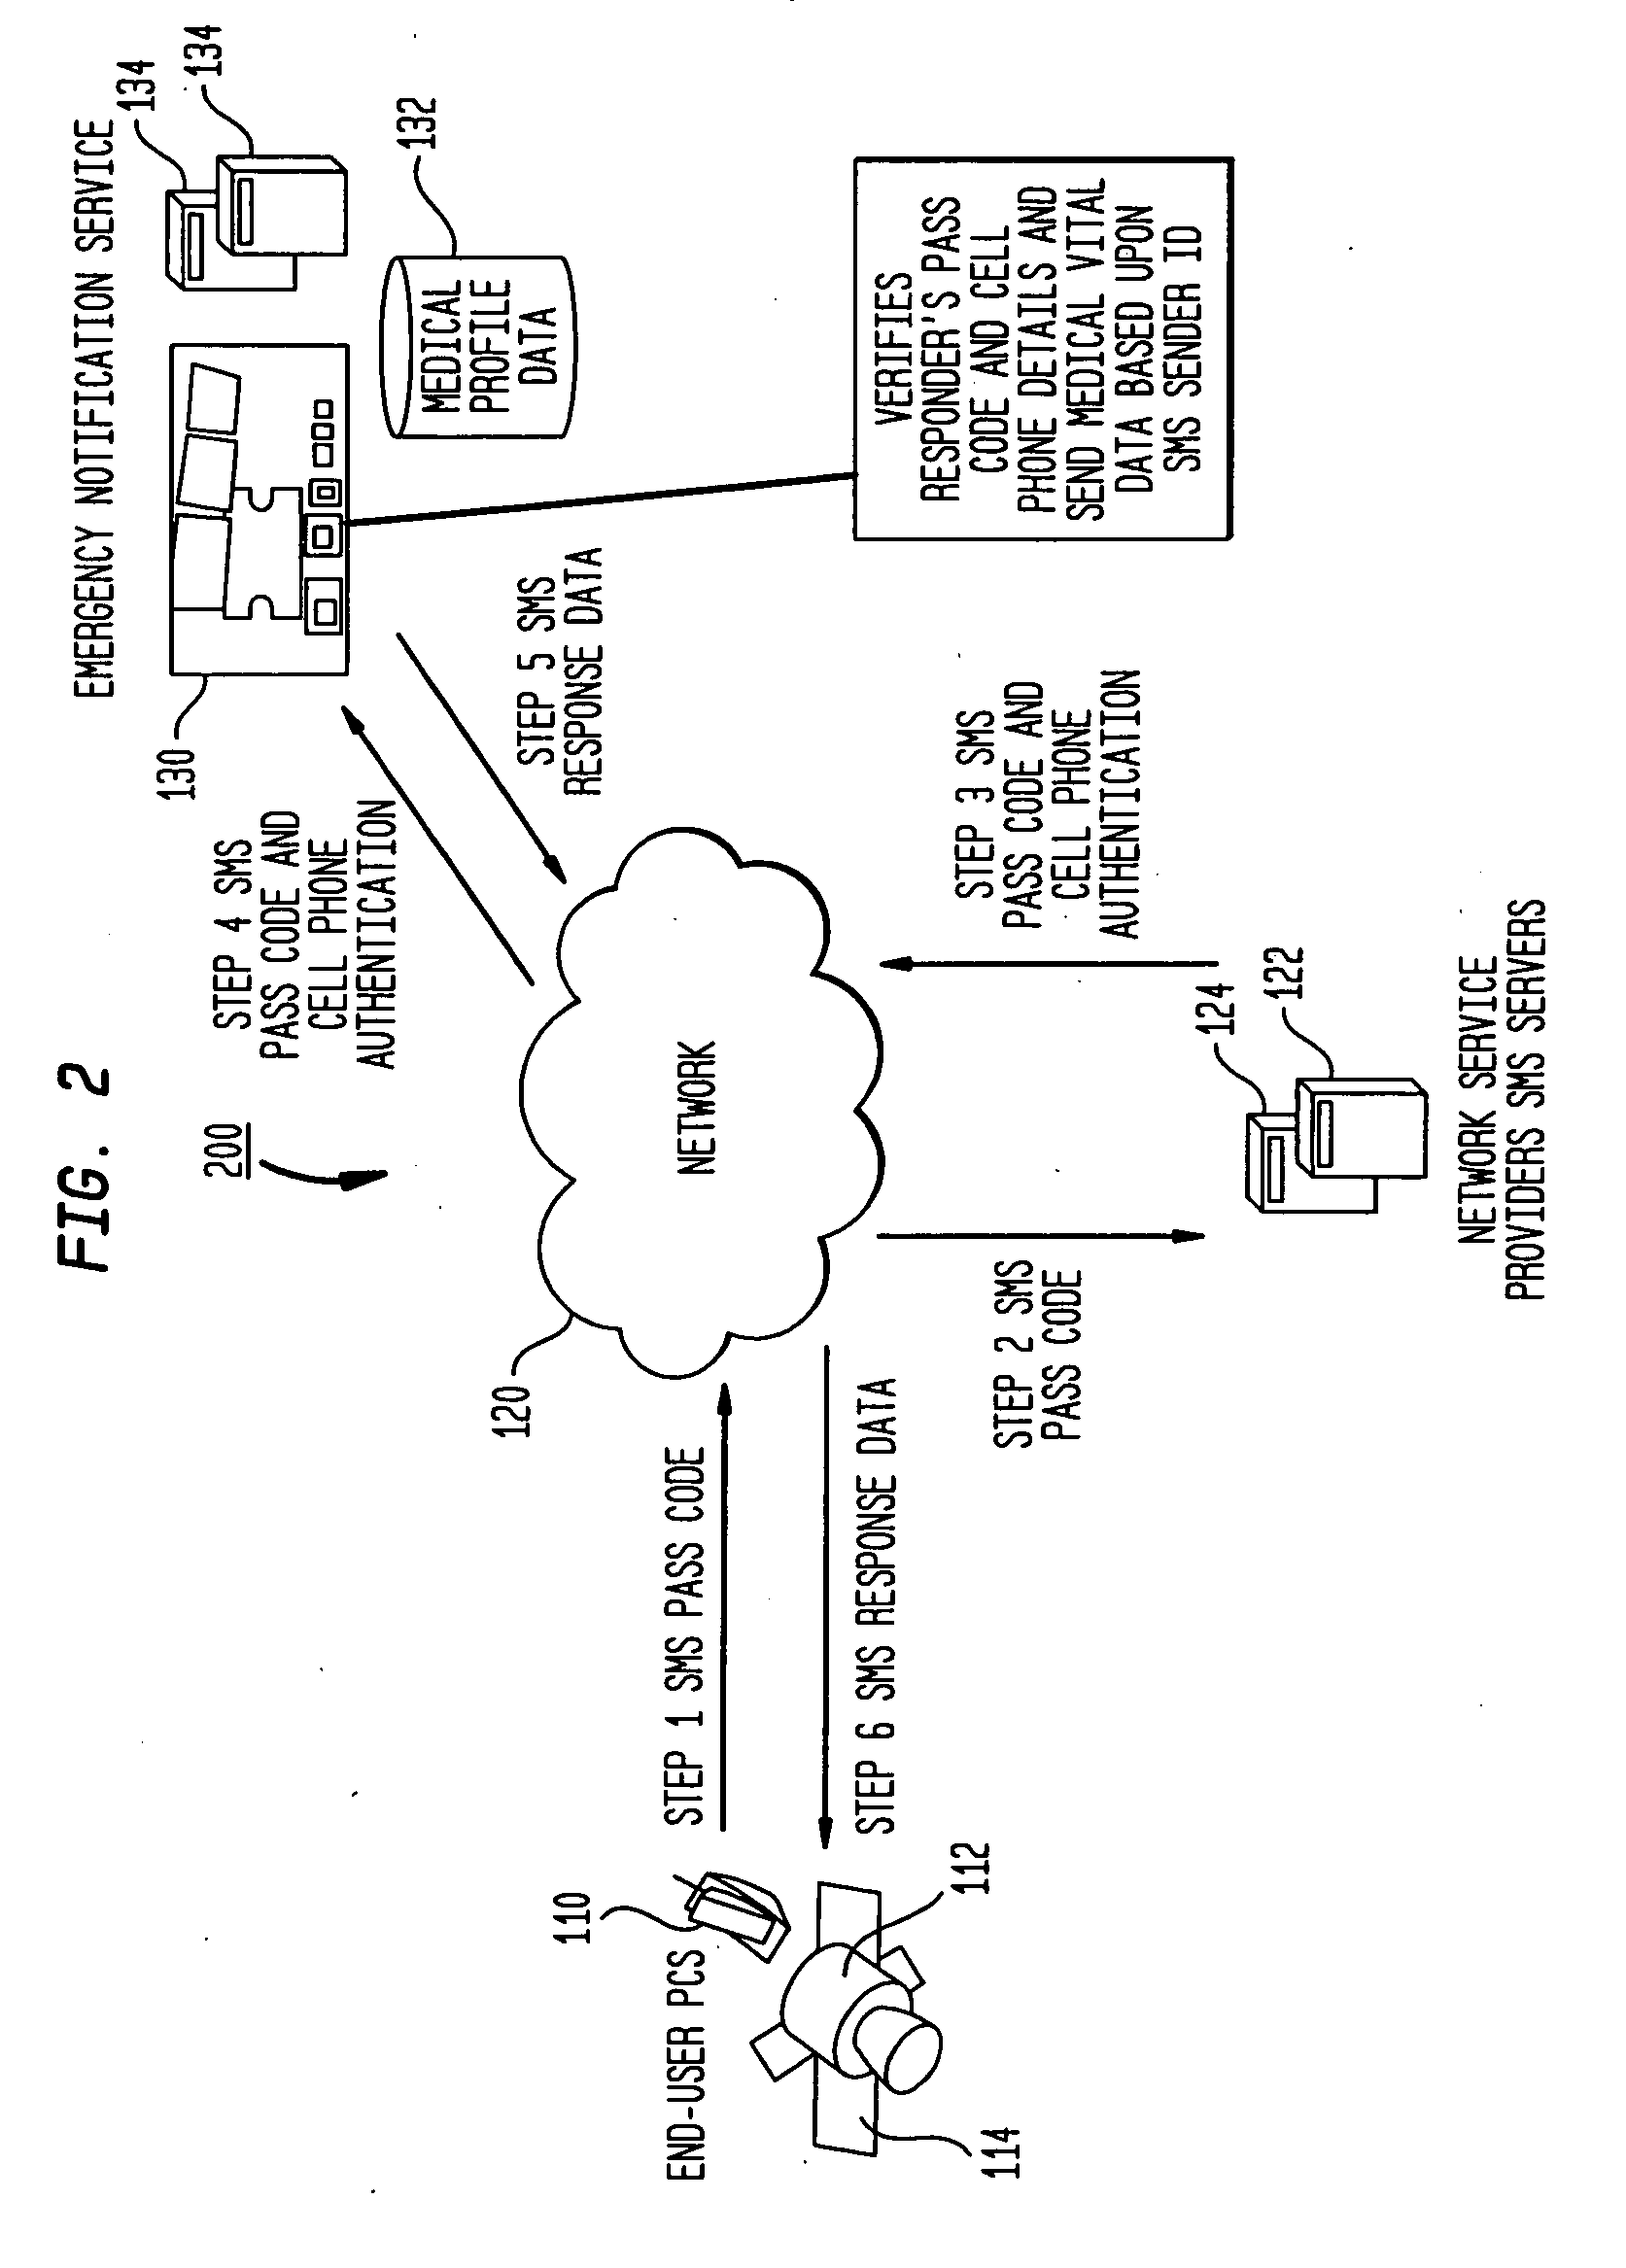 Method and System for Using Cellular/Wireless Phones and Devices for Retrieving Emergency Related Personal Data